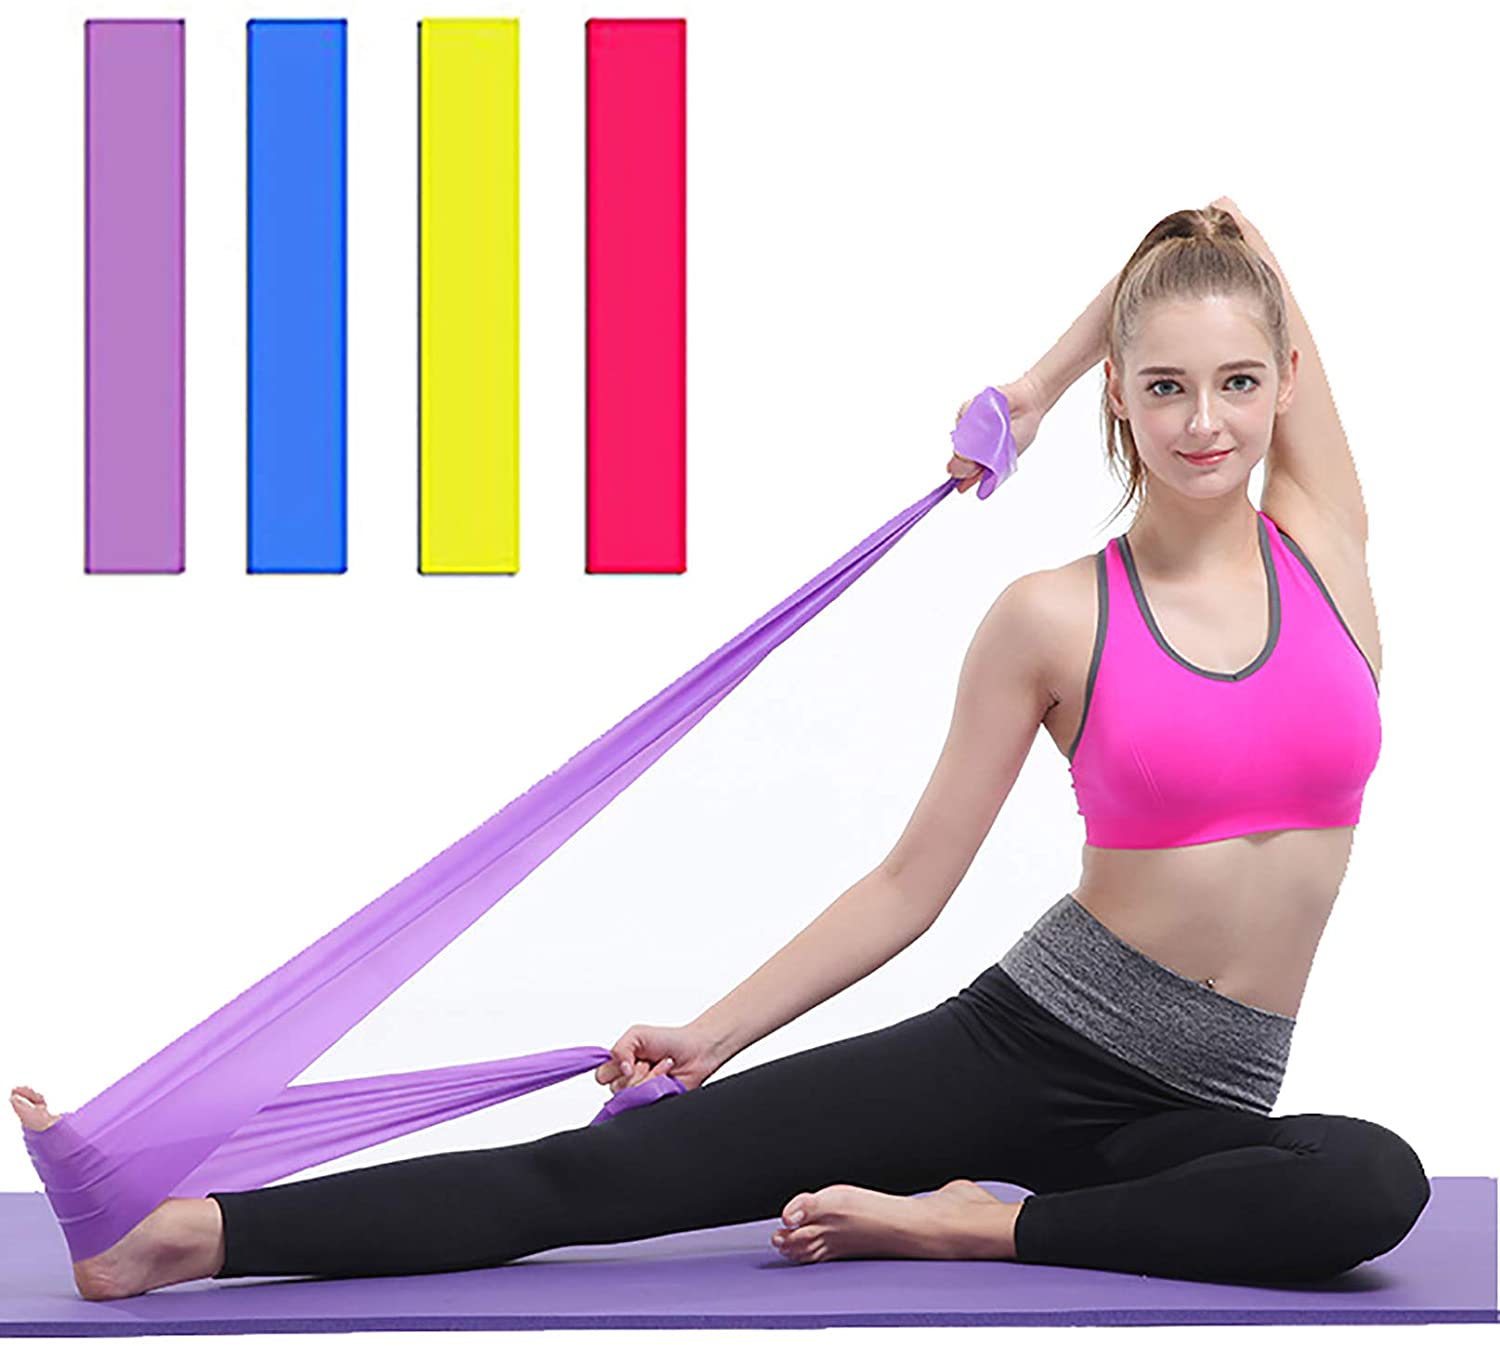 Resistance Bands Set,4 Pack Latex Exercise Bands,Carrying Pouch for Home Workout for Full Body Exercise - Fitness,Yoga,Pilates,Physical Therapy - e4cents